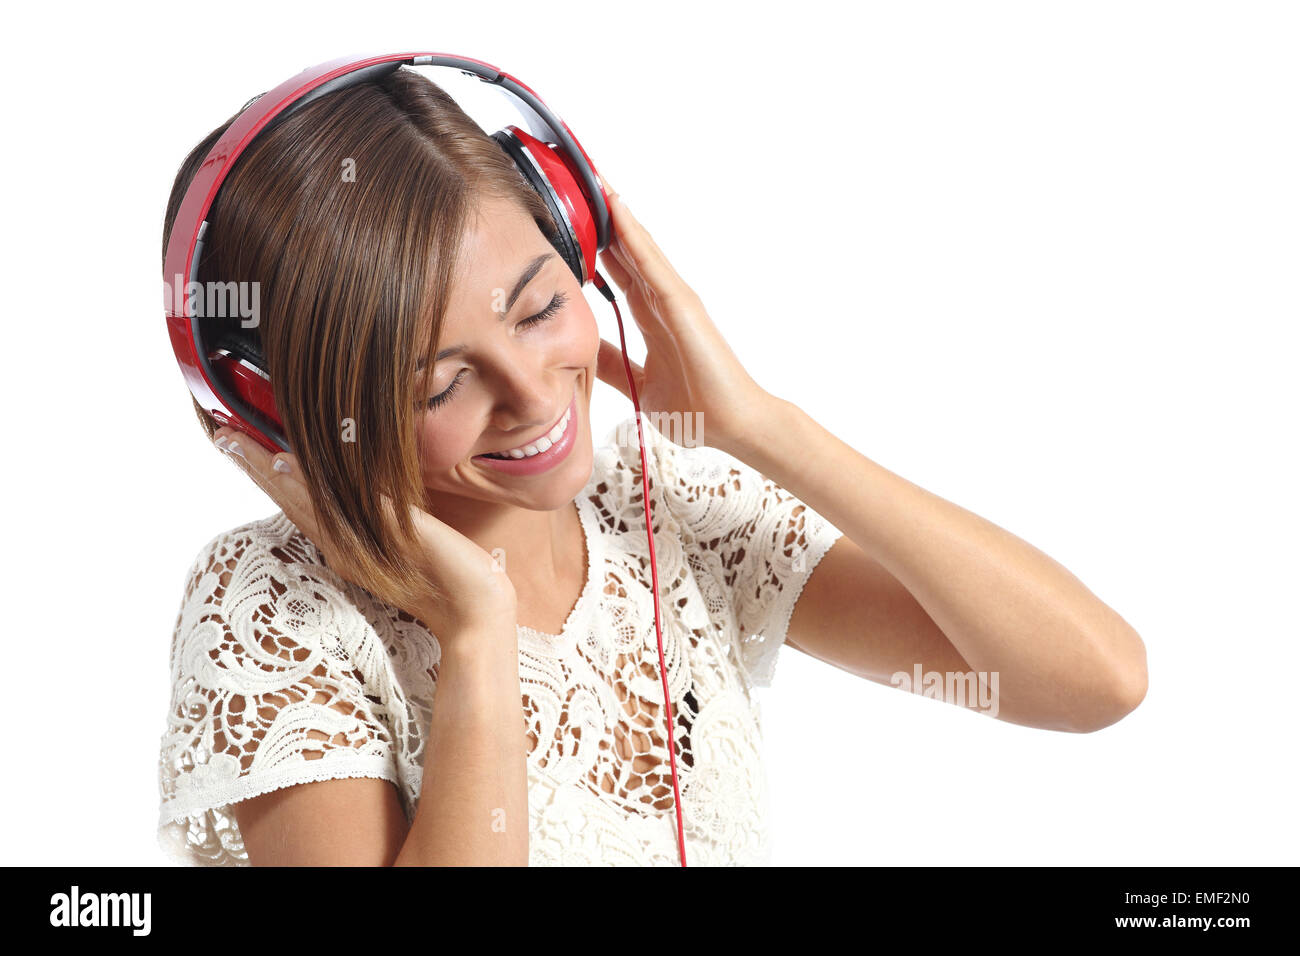 Candid happy woman feeling the music from red headphones isolated on a white background Stock Photo